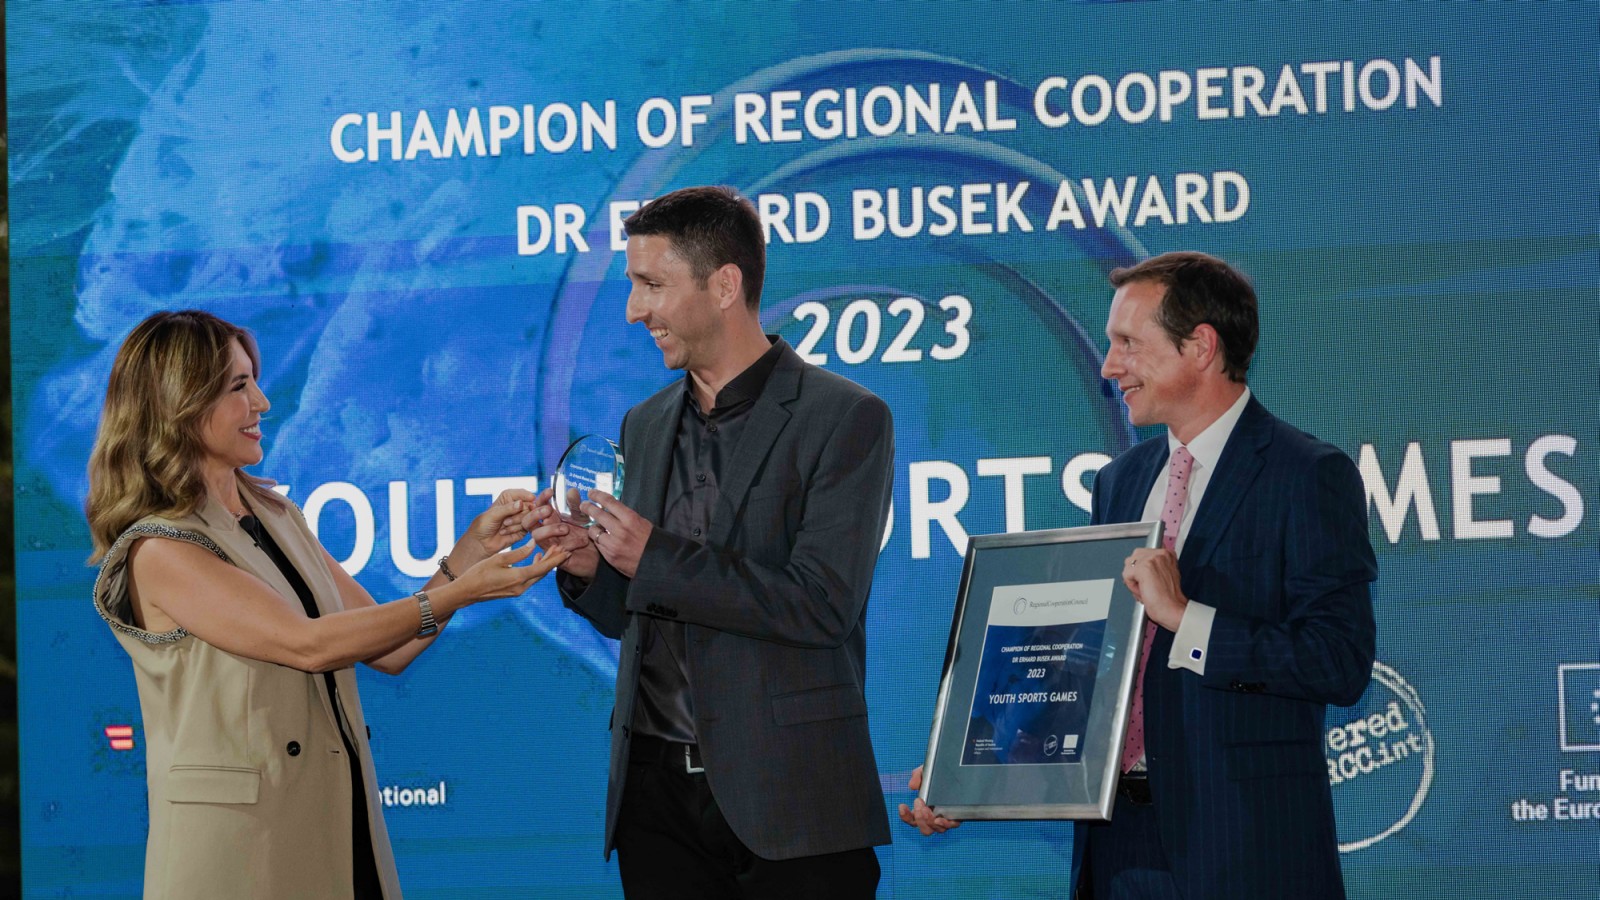 Youth Sports Games won Champion of Regional Cooperation Dr Busek Award